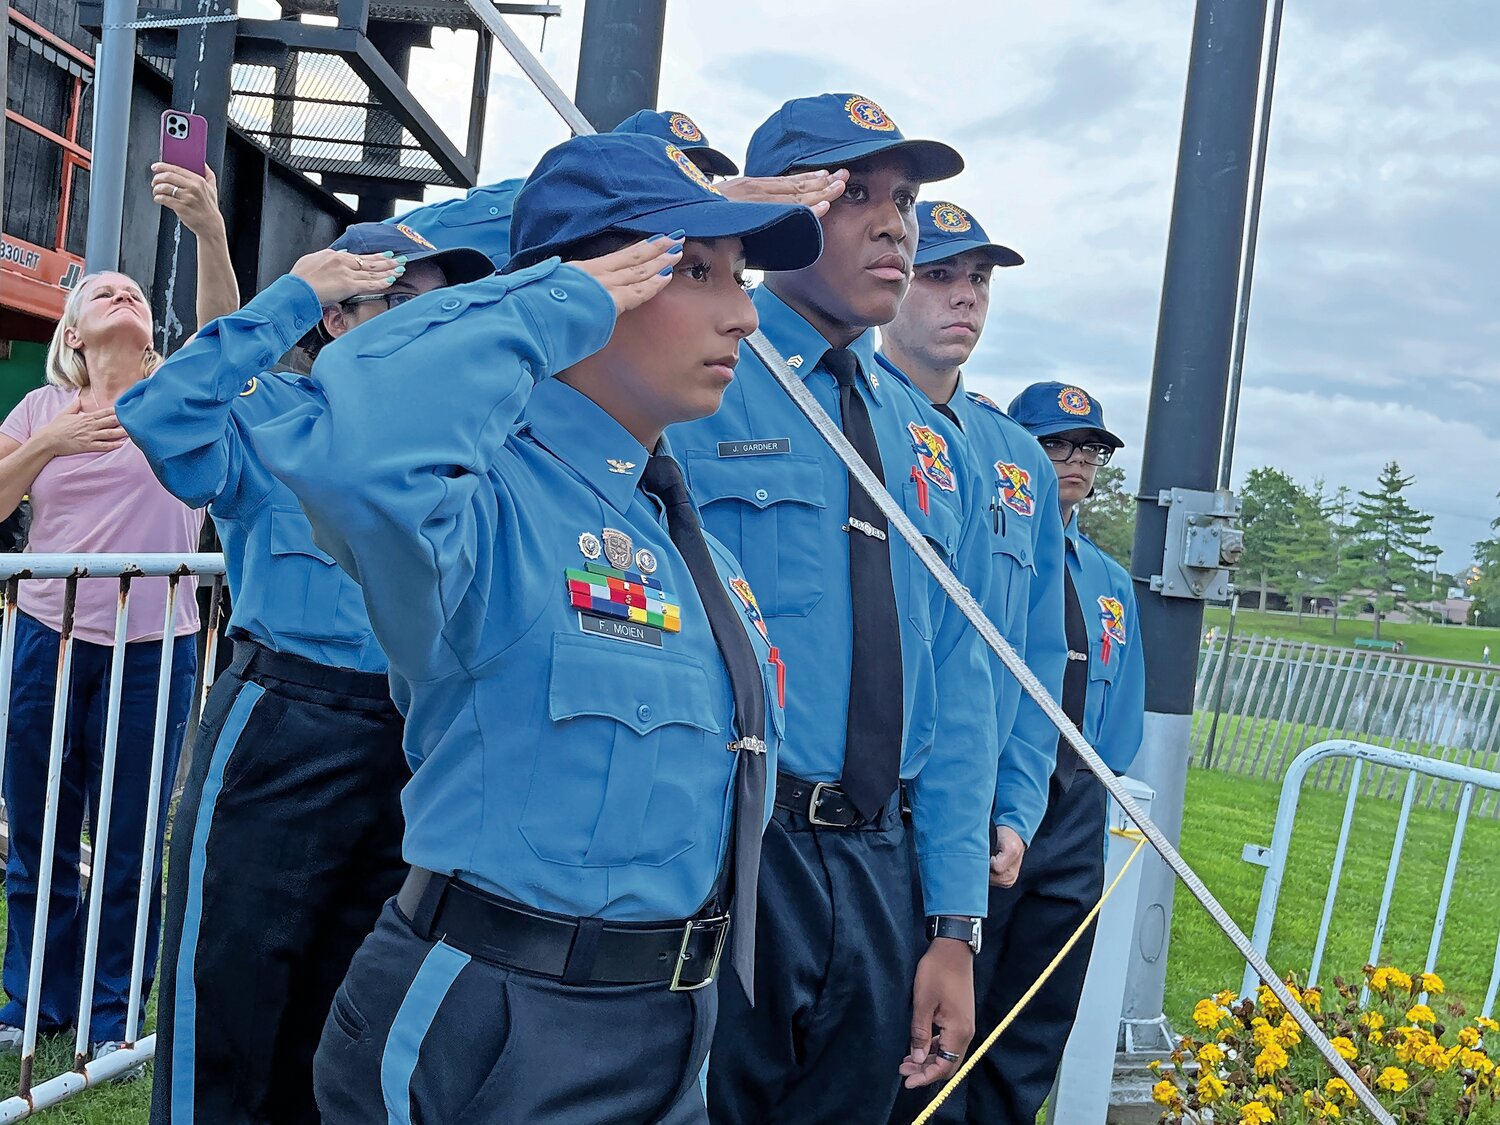 Nassau County law enforcement Explorers salute while Christopher Macchio sings the national anthem during the 9/11 Remembrance Ceremony at Eisenhower Park.  Such ceremonies are important, County Executive Bruce Blakeman said, not just to remember those who we lost, but to ensure younger generations like these Explorers never forget.